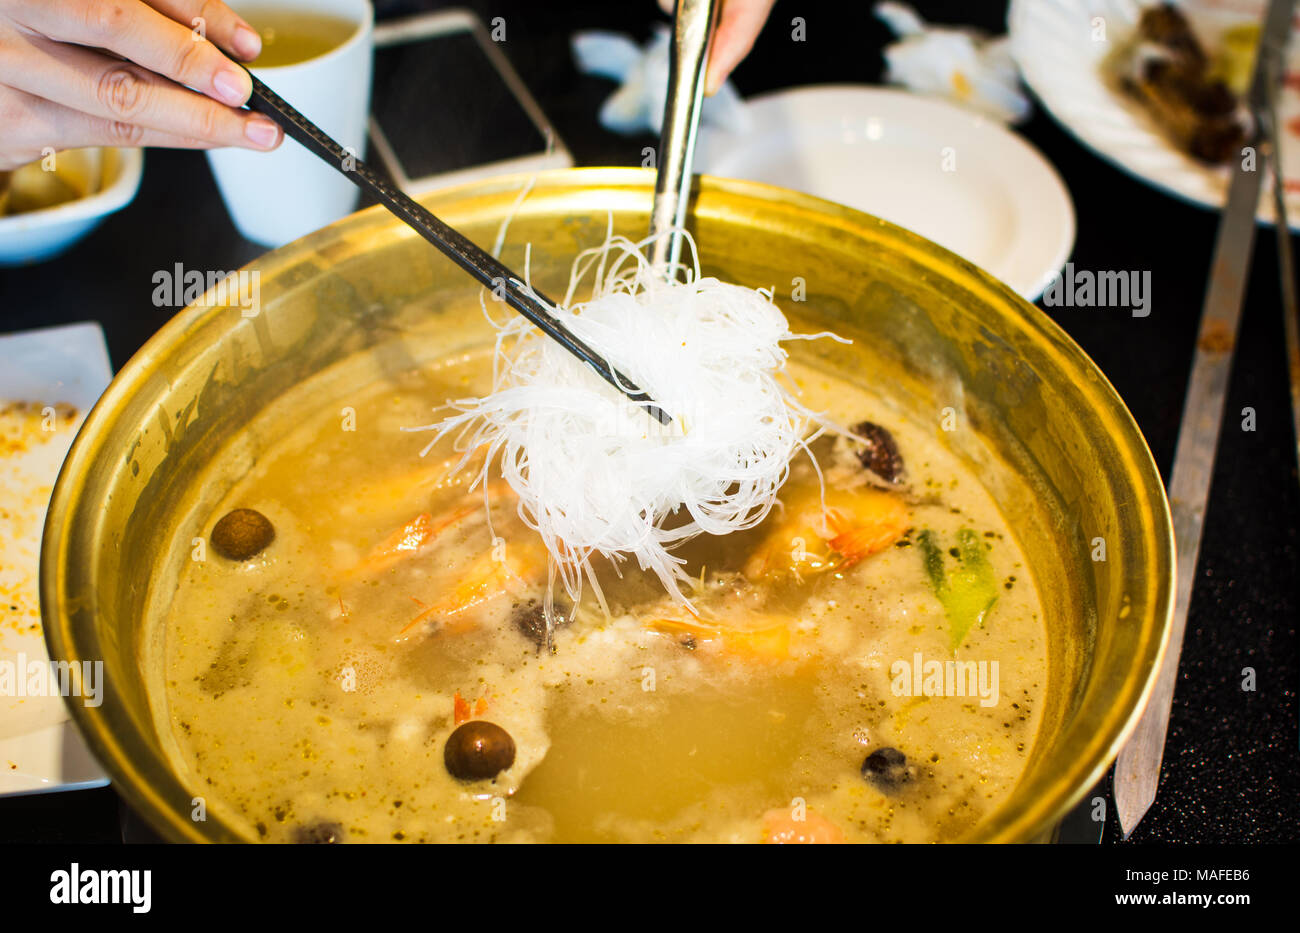 Chopsticks inserting glass noodle into boiling hotpot Stock Photo